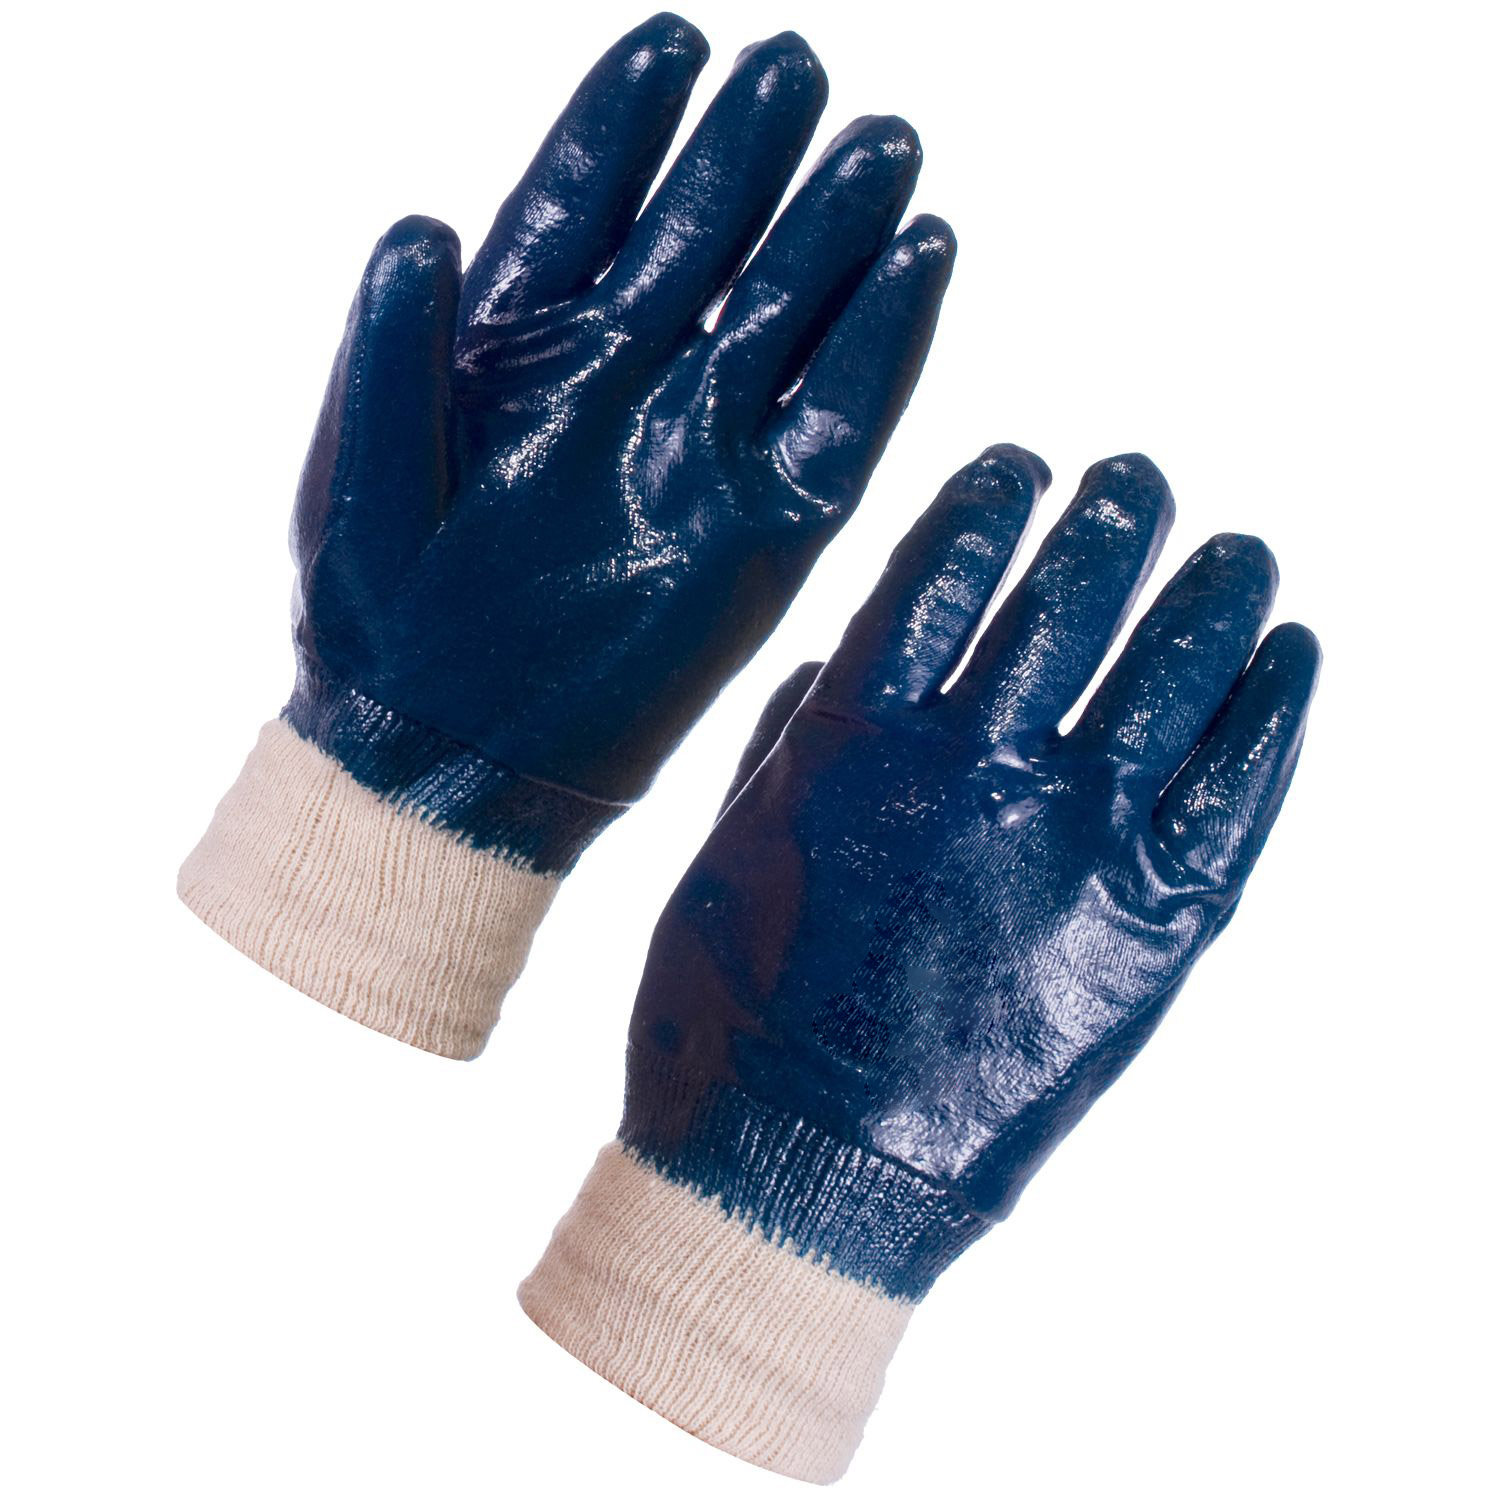 Nitrile Heavyweight Palm Full Dip Knit Wrist Gloves with Dry Grip